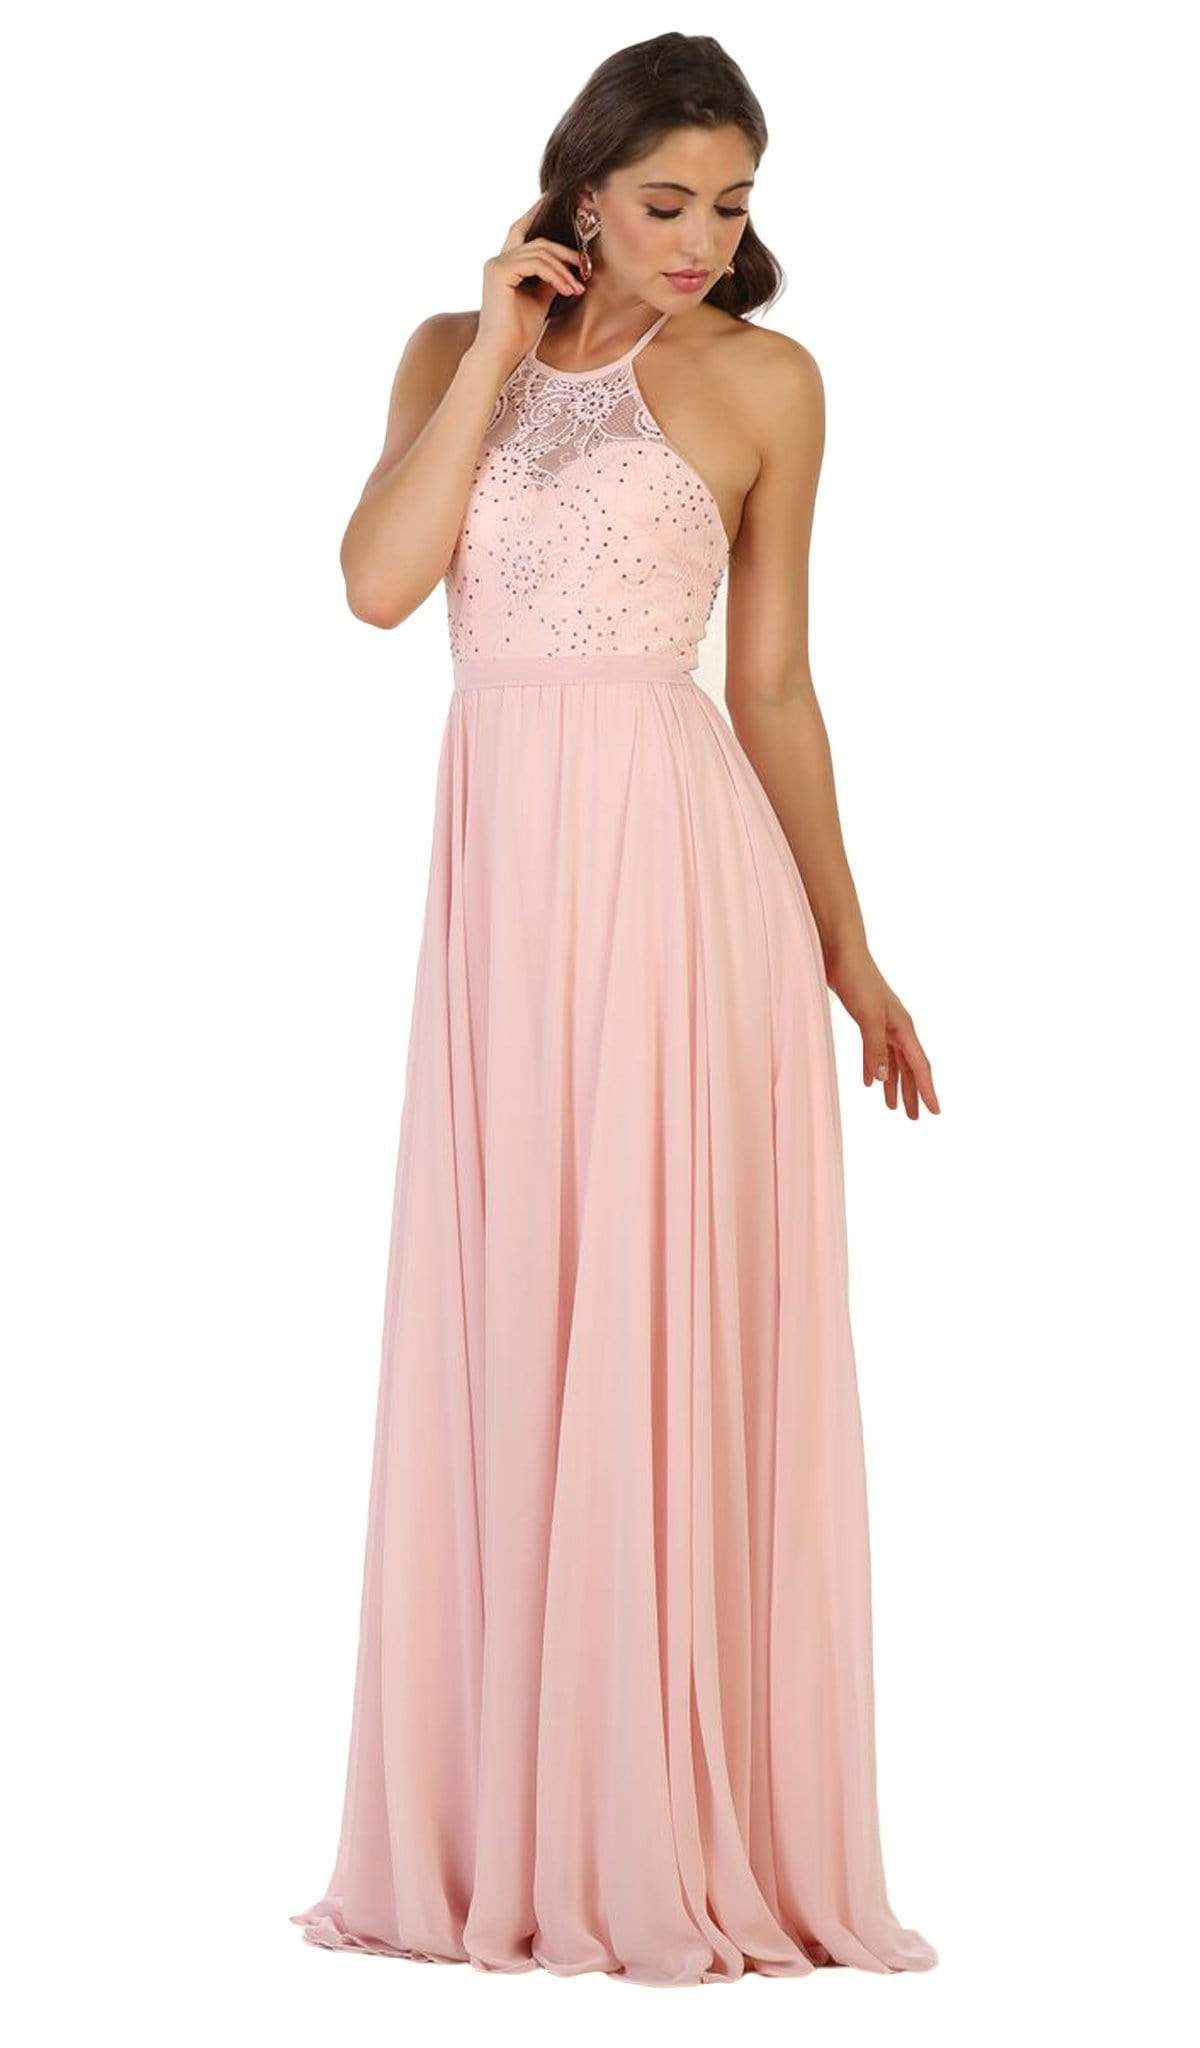 Image of May Queen - Embellished Illusion Halter A-line Evening Dress